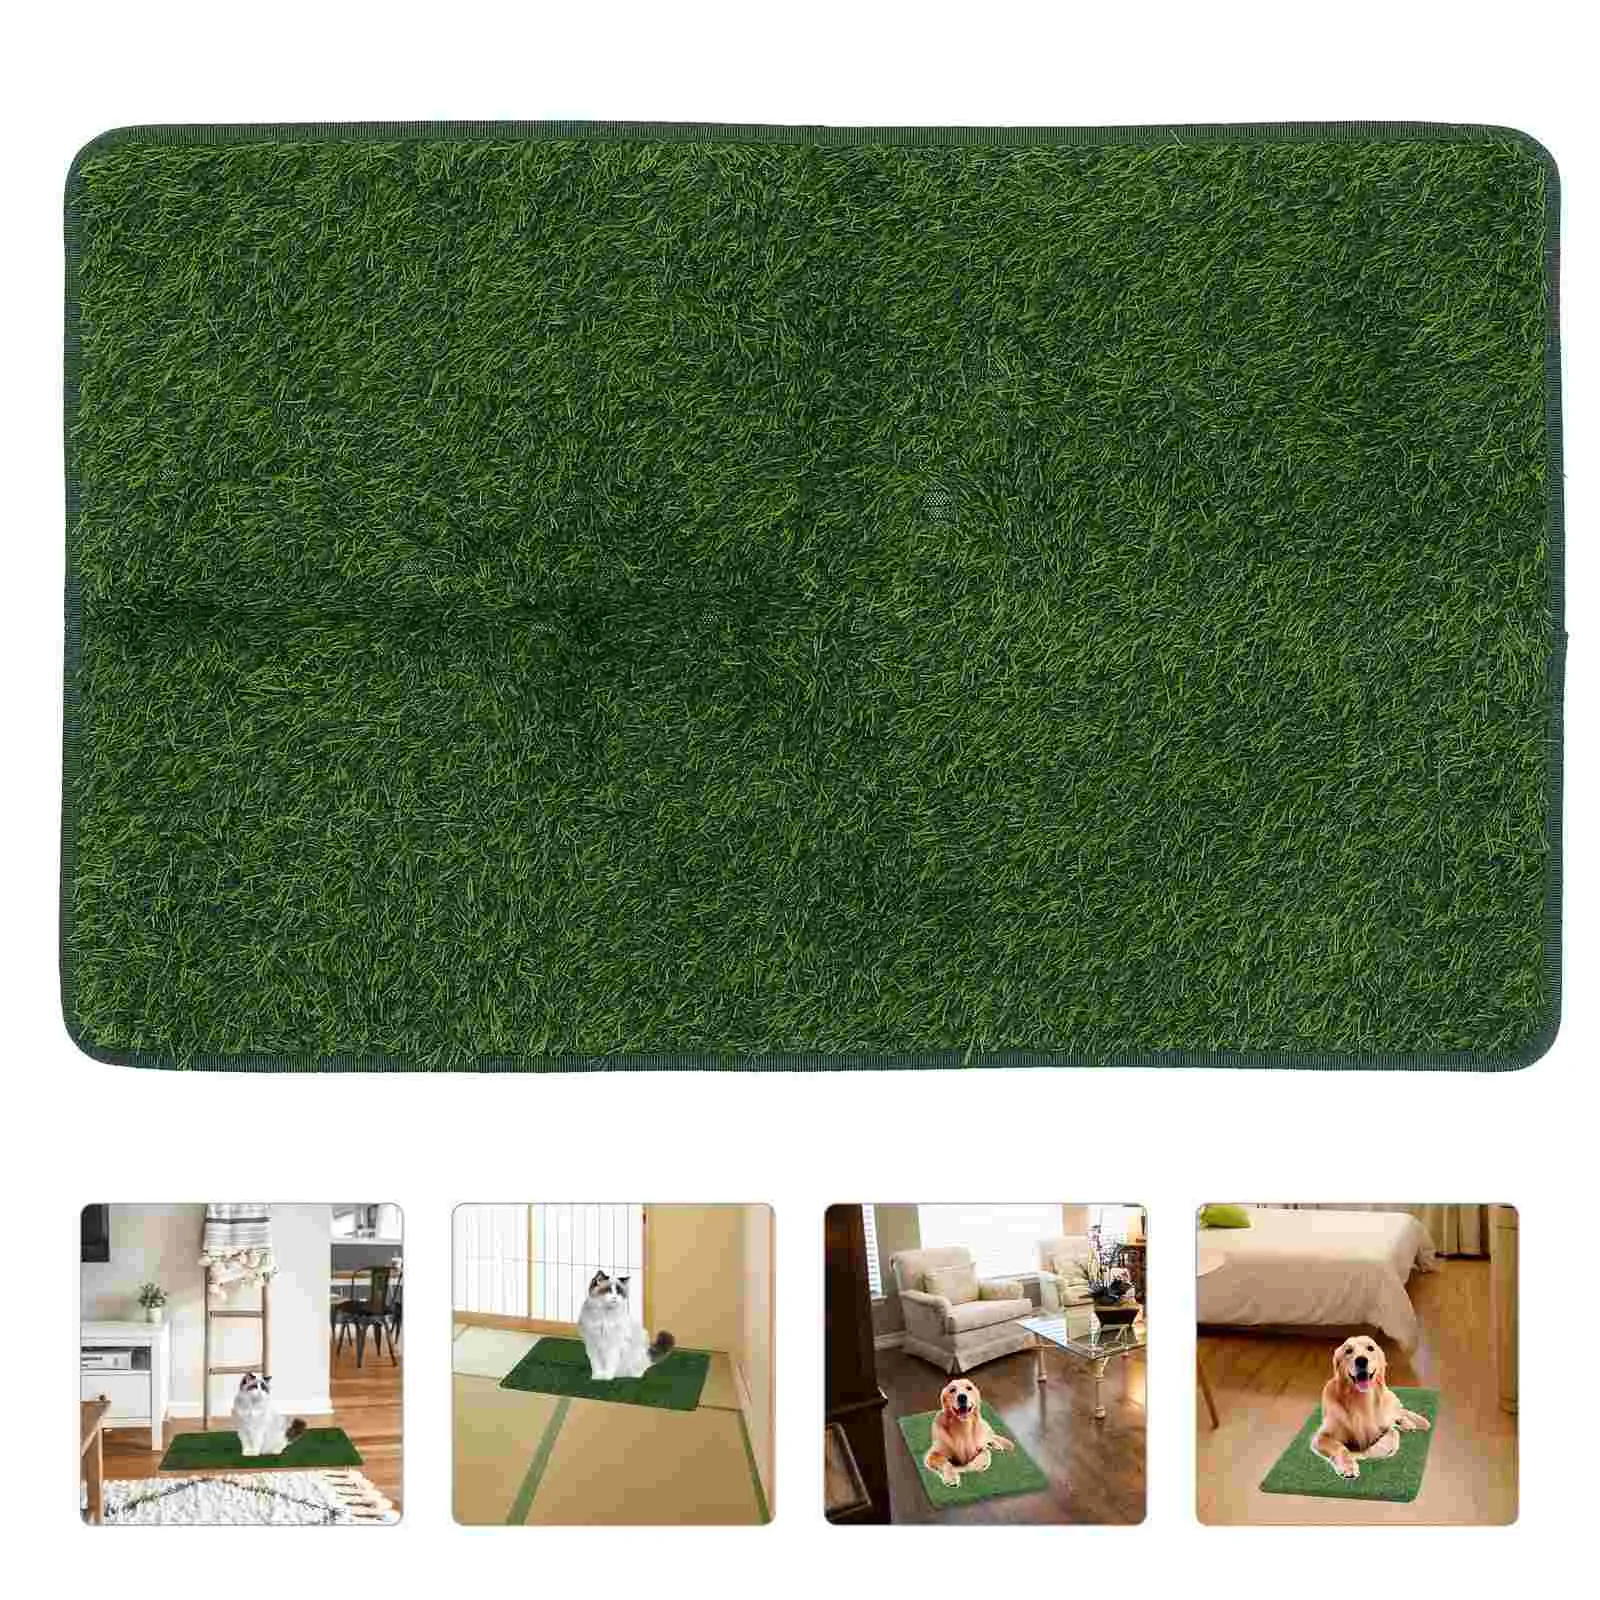 

Popetpop Turf Grass Dog Pad Washable Pet Pee Pads Artificial Patch Potty Training Mat Reusable Incontinence Bed Absorbing Pets